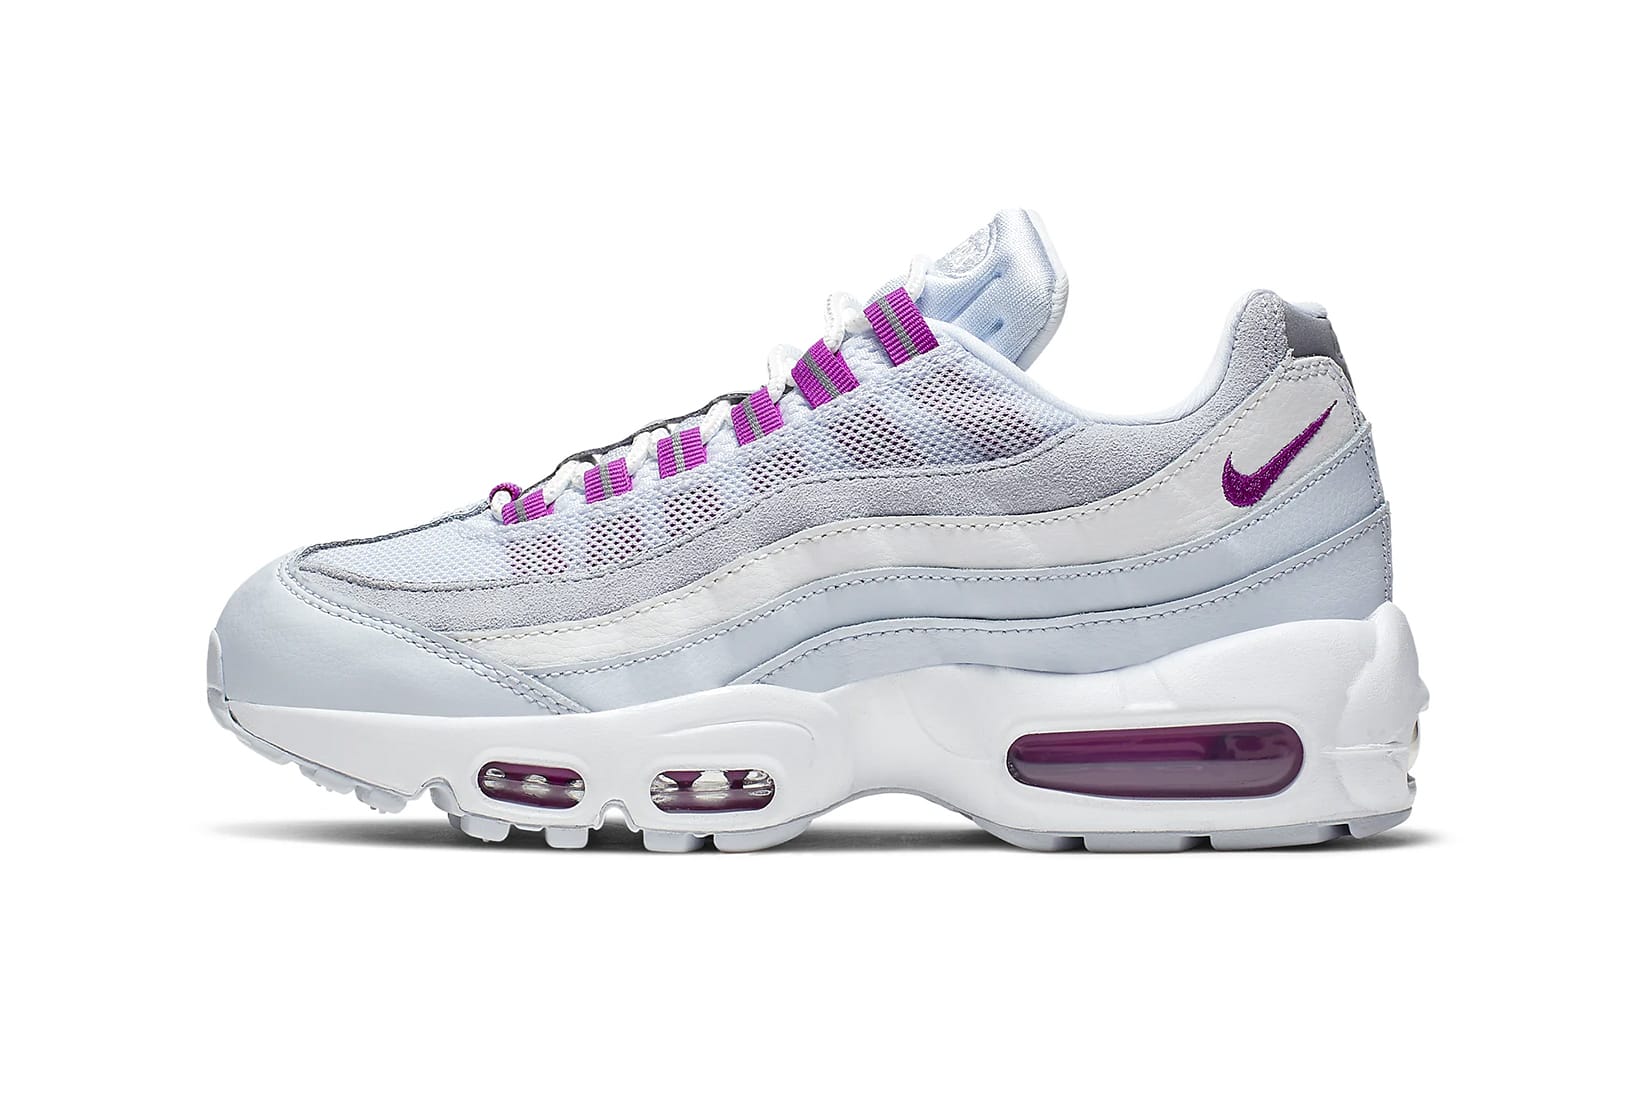 Air Max 95 in Two New Pastel Colorways 